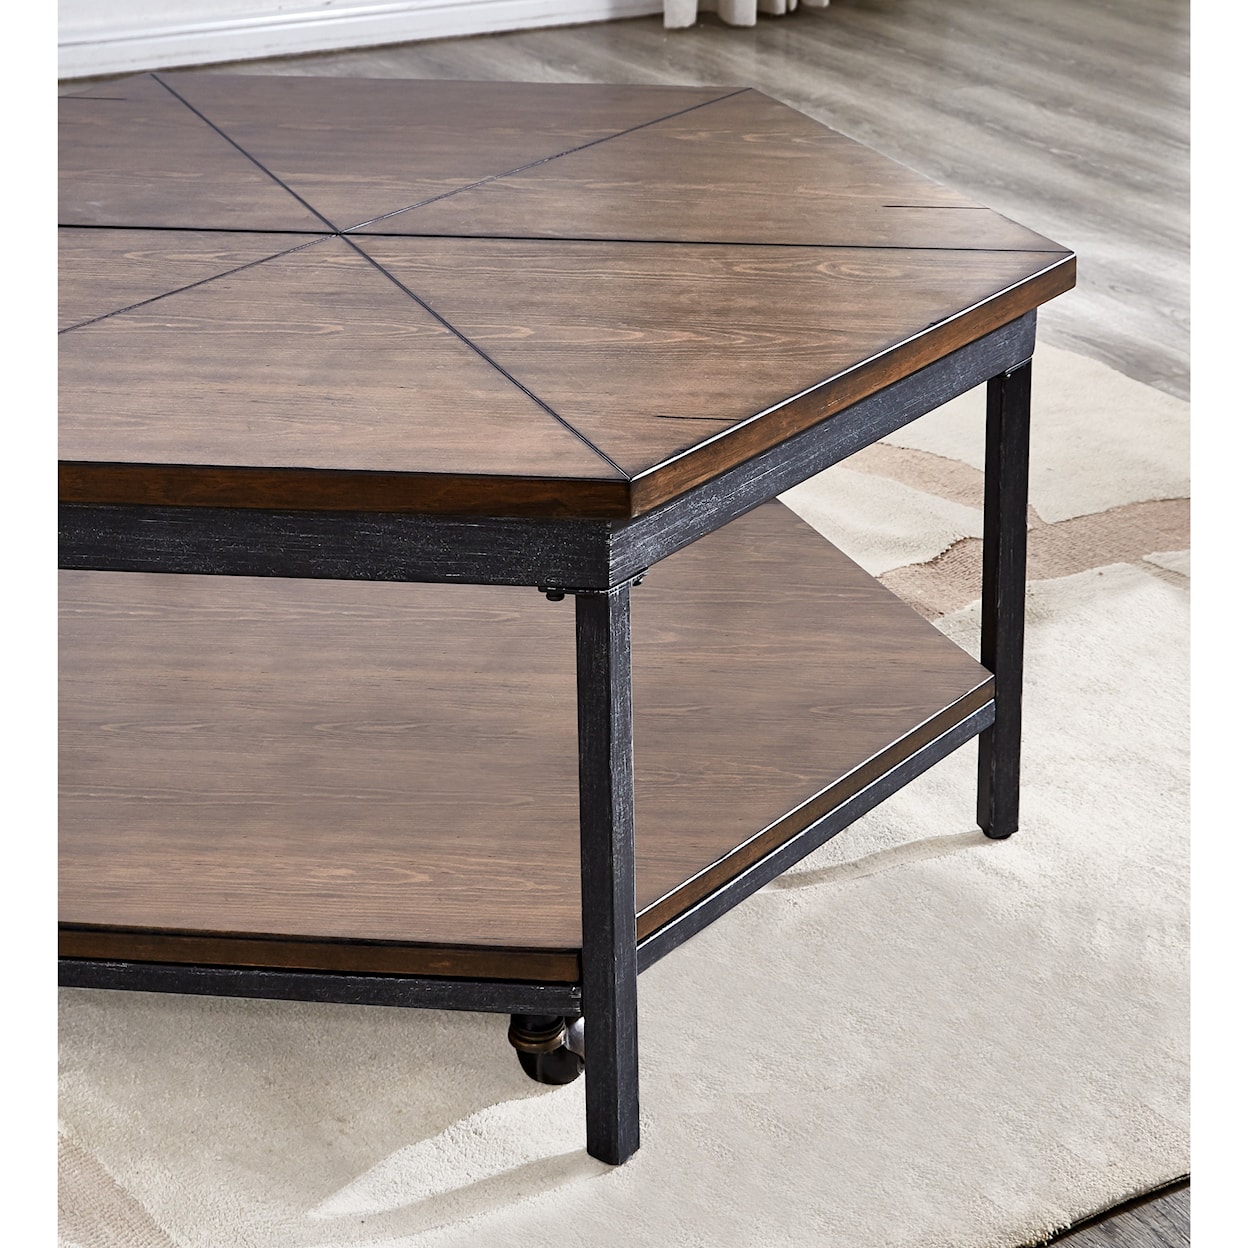 Steve Silver Ultimo Hexagon LiftTop Cocktail Table w/Casters